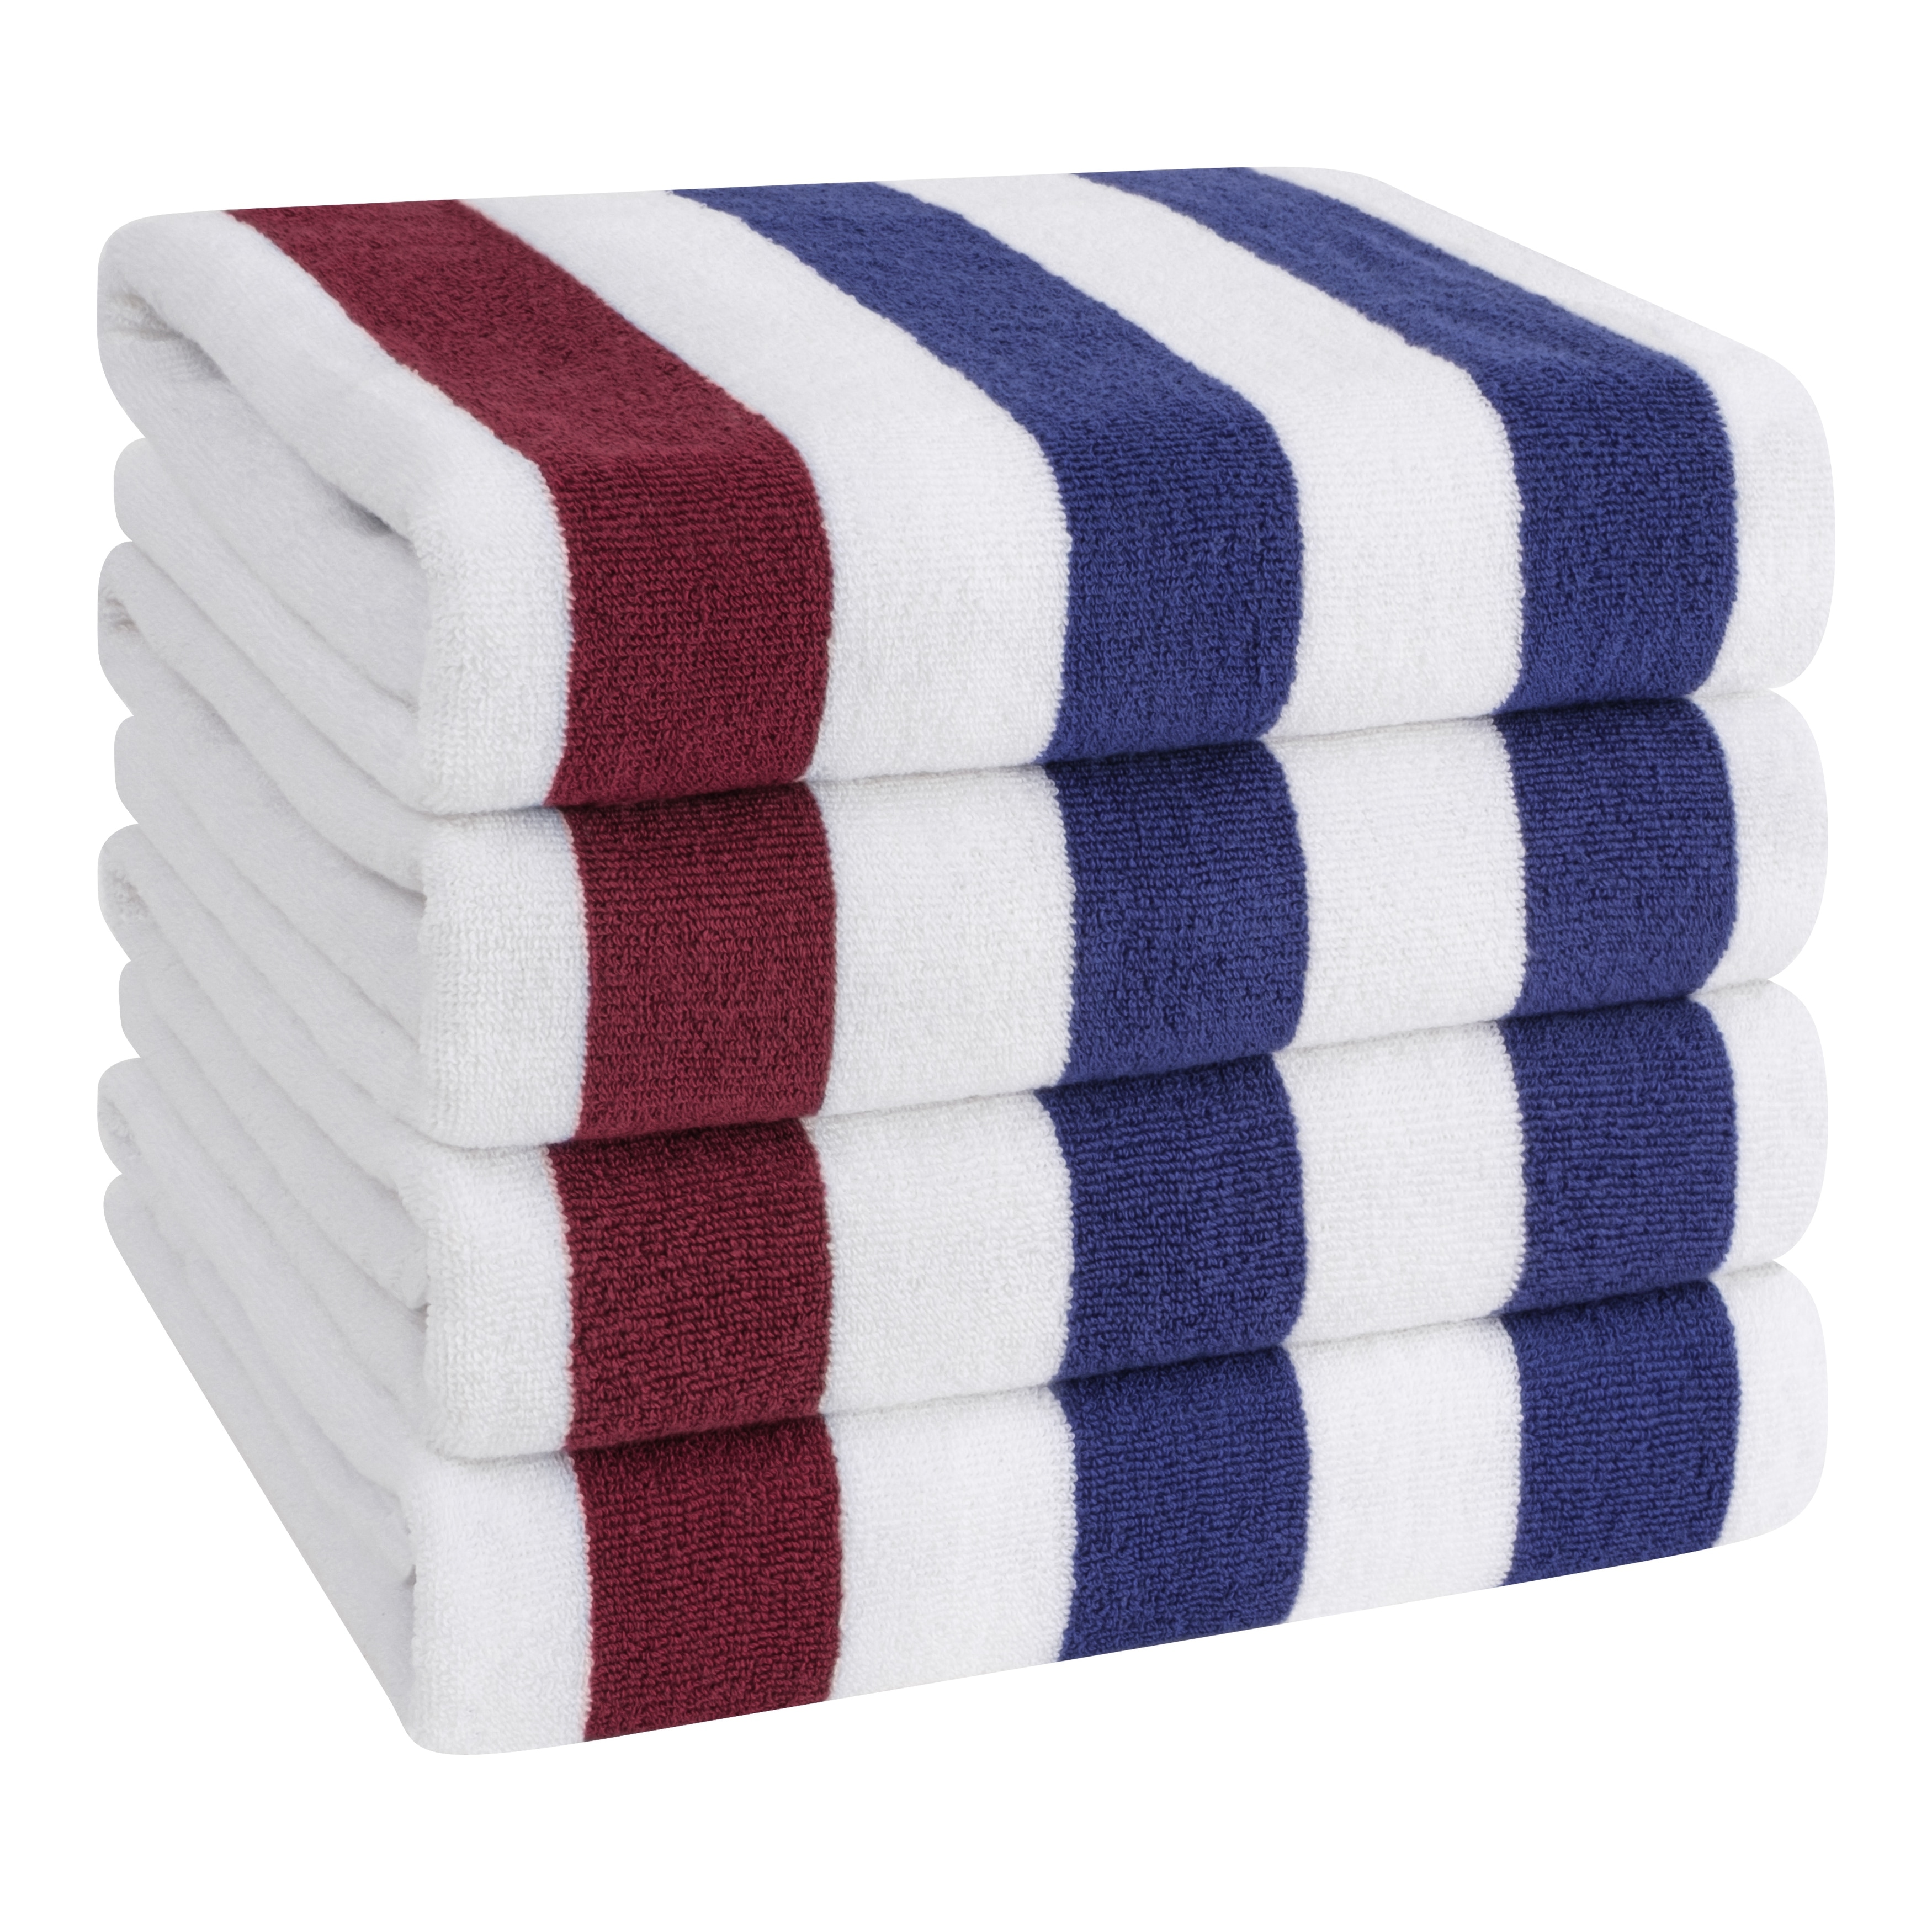 https://ak1.ostkcdn.com/images/products/is/images/direct/05e35abc61ce997afc2982efd28613fe9b59a921/American-Soft-Linen%2CTurkish-Cotton-4-Pack-Beach-Towels%2C-30-x-60-Cabana-Striped-Pool-Towels.jpg